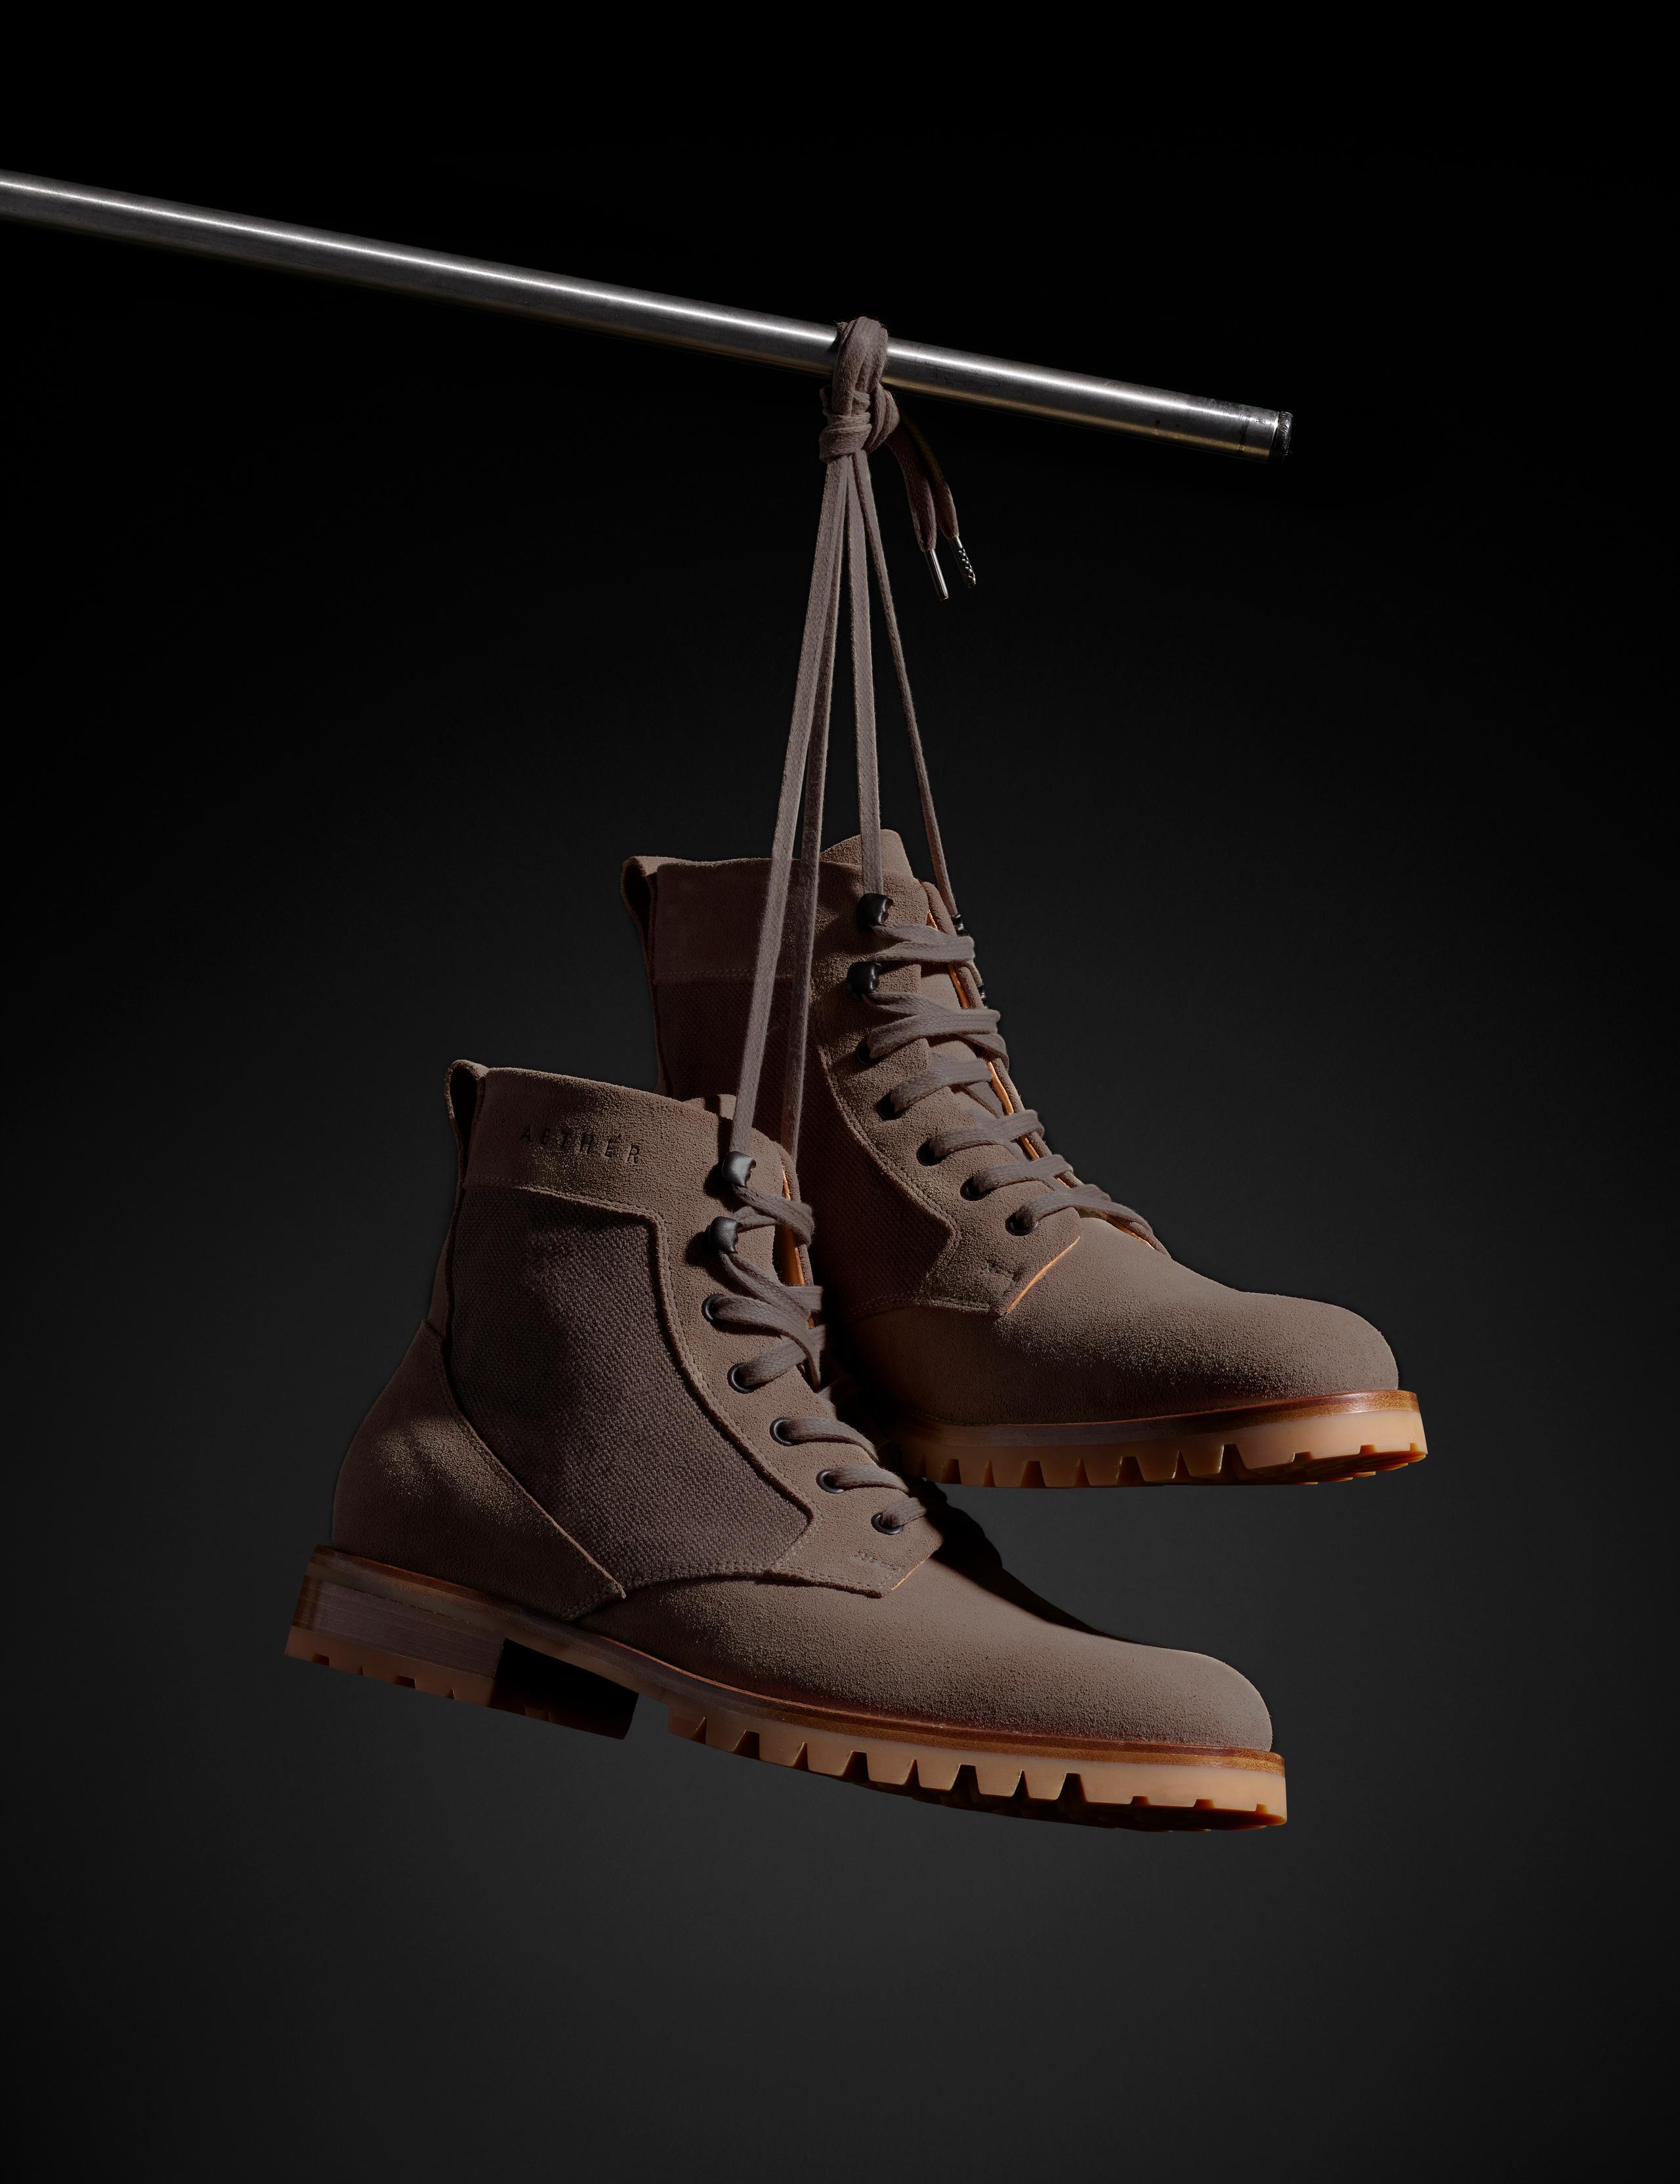 Ojat City Boot hanging by laces from metal rod